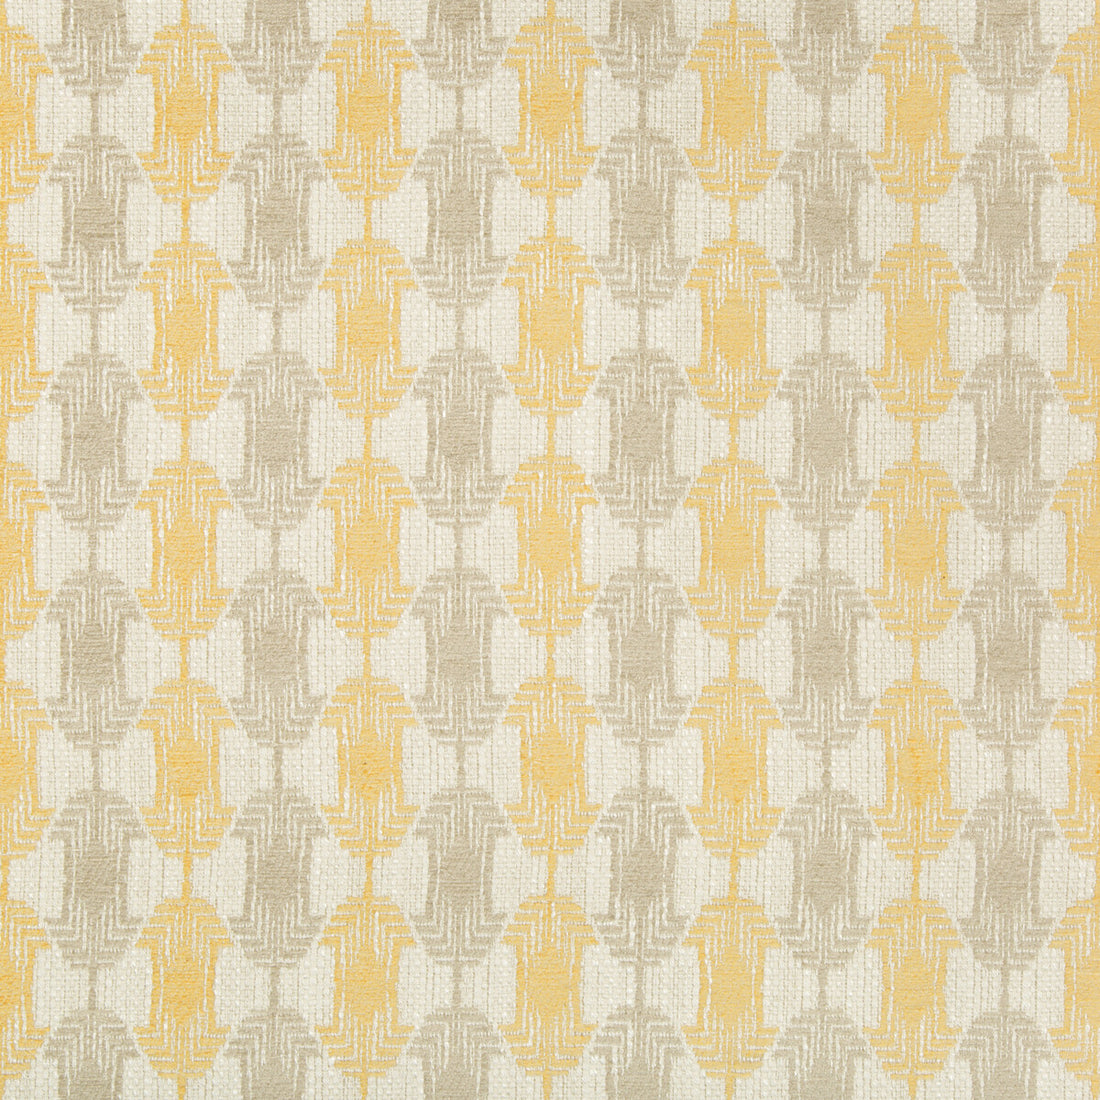 Quartz Weave fabric in gold color - pattern GWF-3751.44.0 - by Lee Jofa Modern in the Gems collection